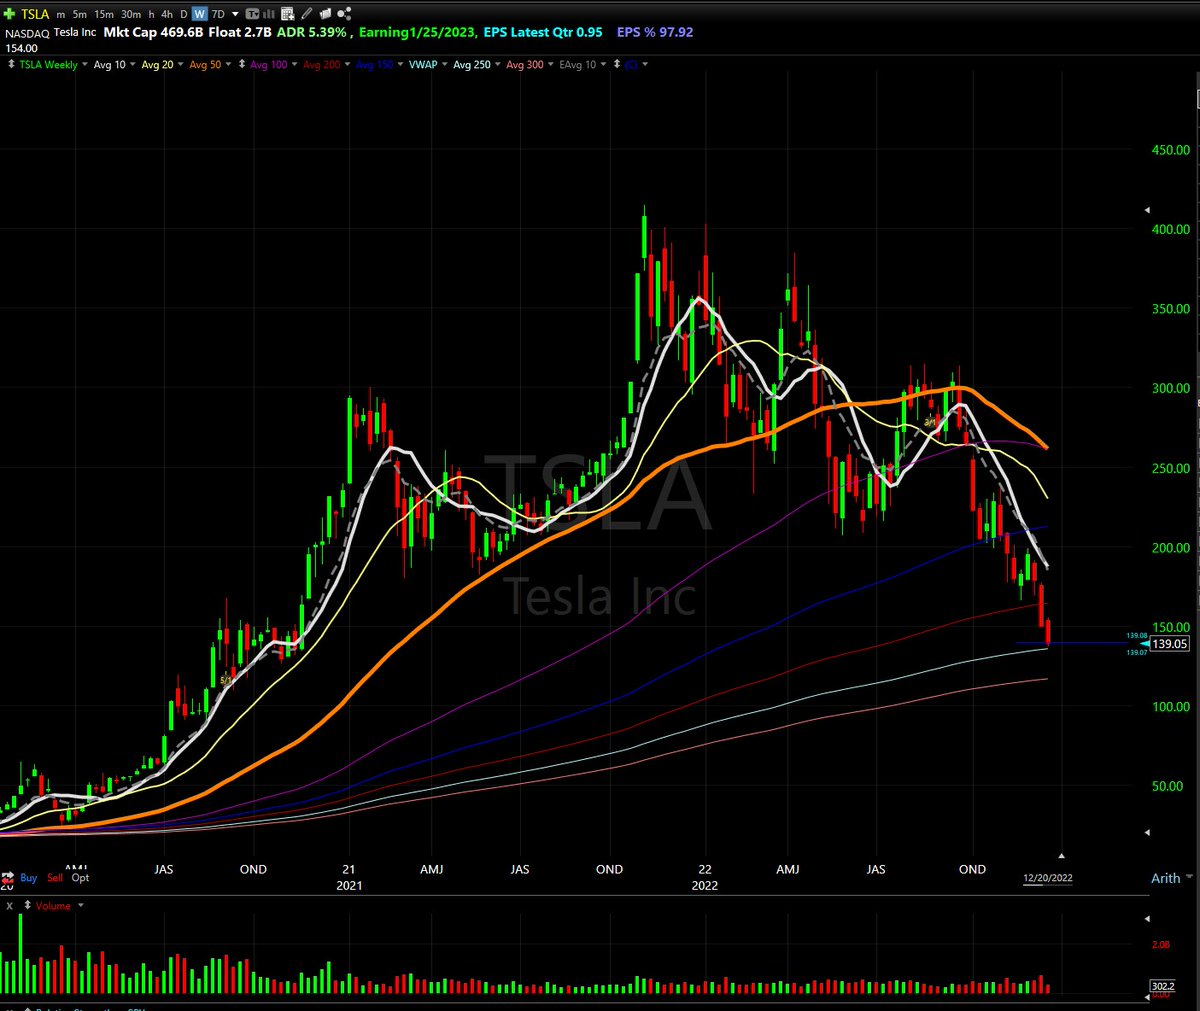 $TSLA is within a couple points where it will bounce. $135